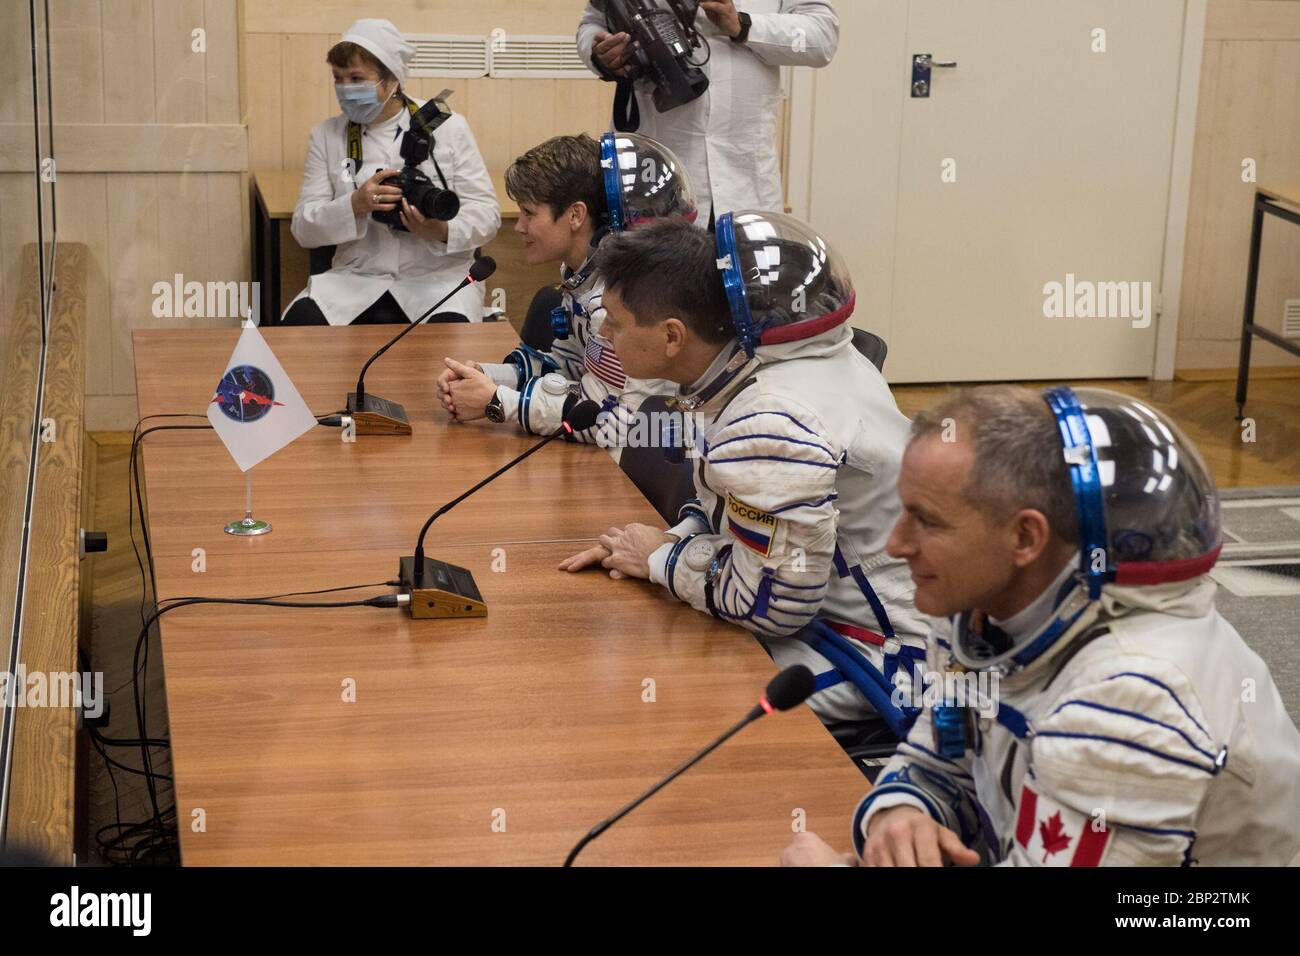 Expedition 58 Pressure Checks  Expedition 58 crew, from top to bottom, Flight Engineer Anne McClain of NASA, Soyuz Commander Oleg Kononenko of Roscosmos, and Flight Engineer David Saint-Jacques of the Canadian Space Agency (CSA) speak to family and friends after having their Russian Sokol suits pressure checked in preparation for their launch aboard the Soyuz MS-11 spacecraft on Monday, Dec. 3, 2018, at the Baikonur Cosmodrome in Kazakhstan. Launch of the Soyuz rocket is scheduled for the same day and will carry Kononenko, Saint-Jacques, and McClain into orbit to begin their six and a half mon Stock Photo